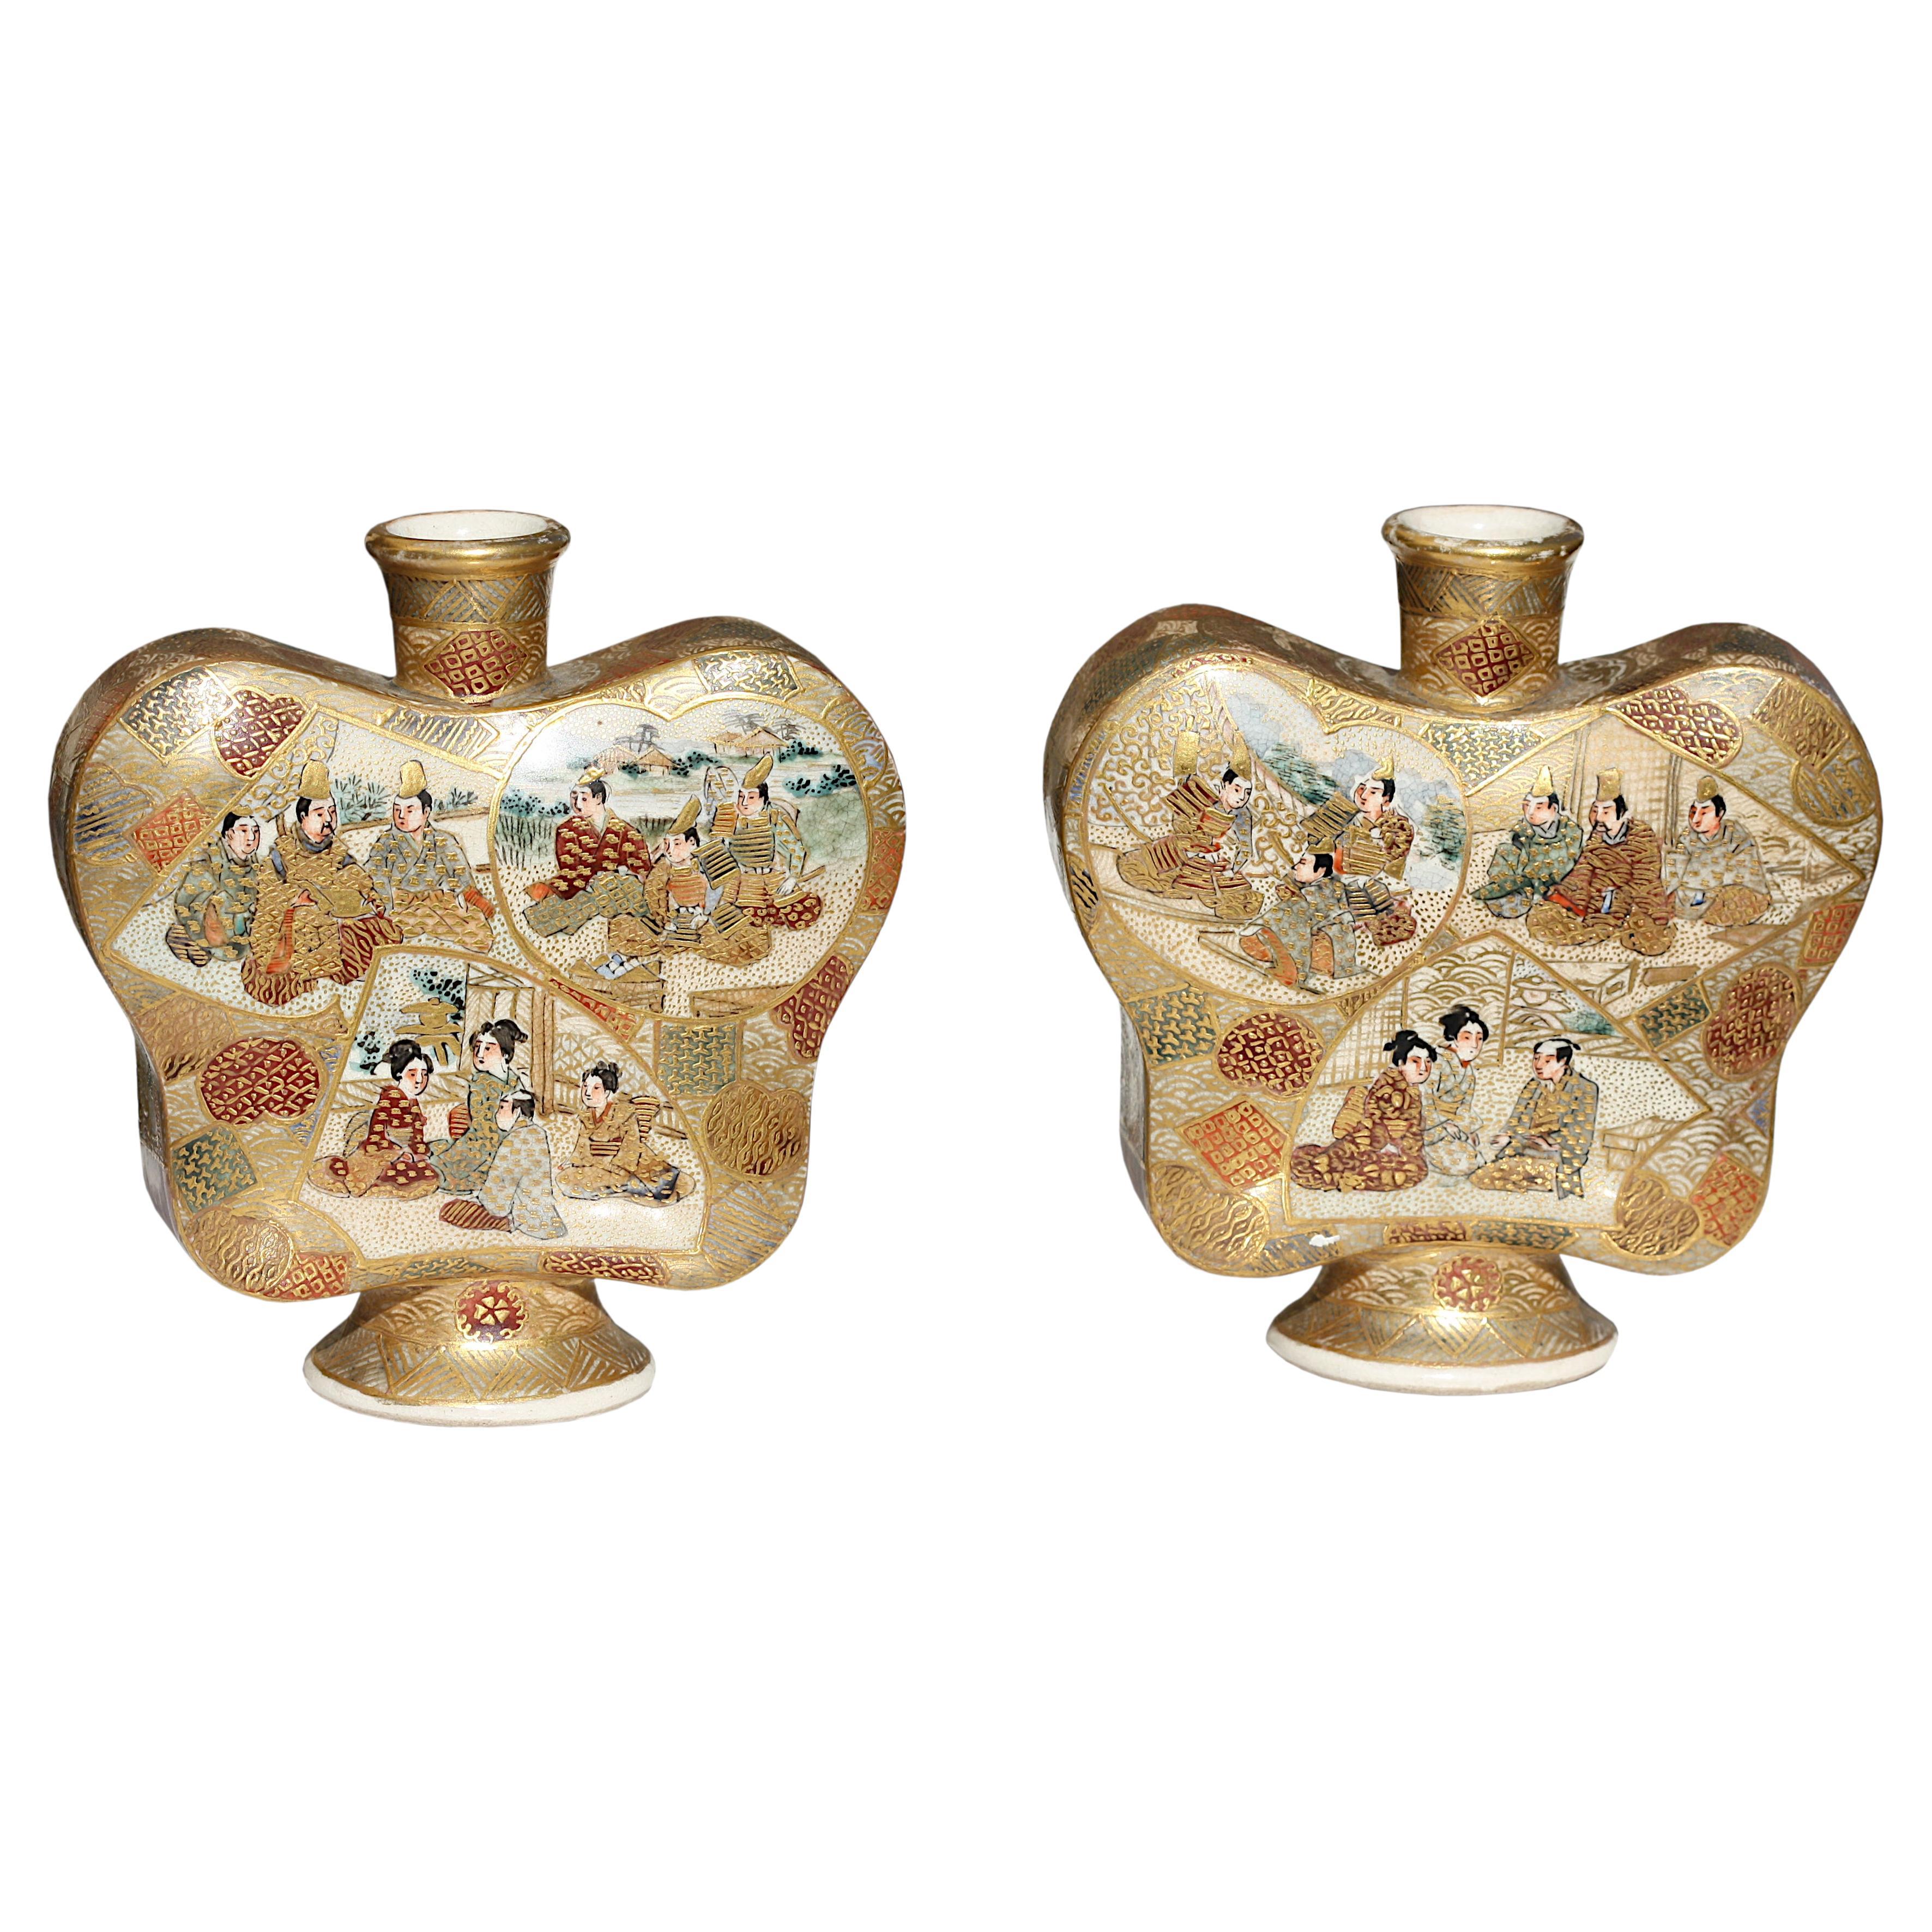 A pair of "butterfly" Satsuma earthenware vases, Meiji period